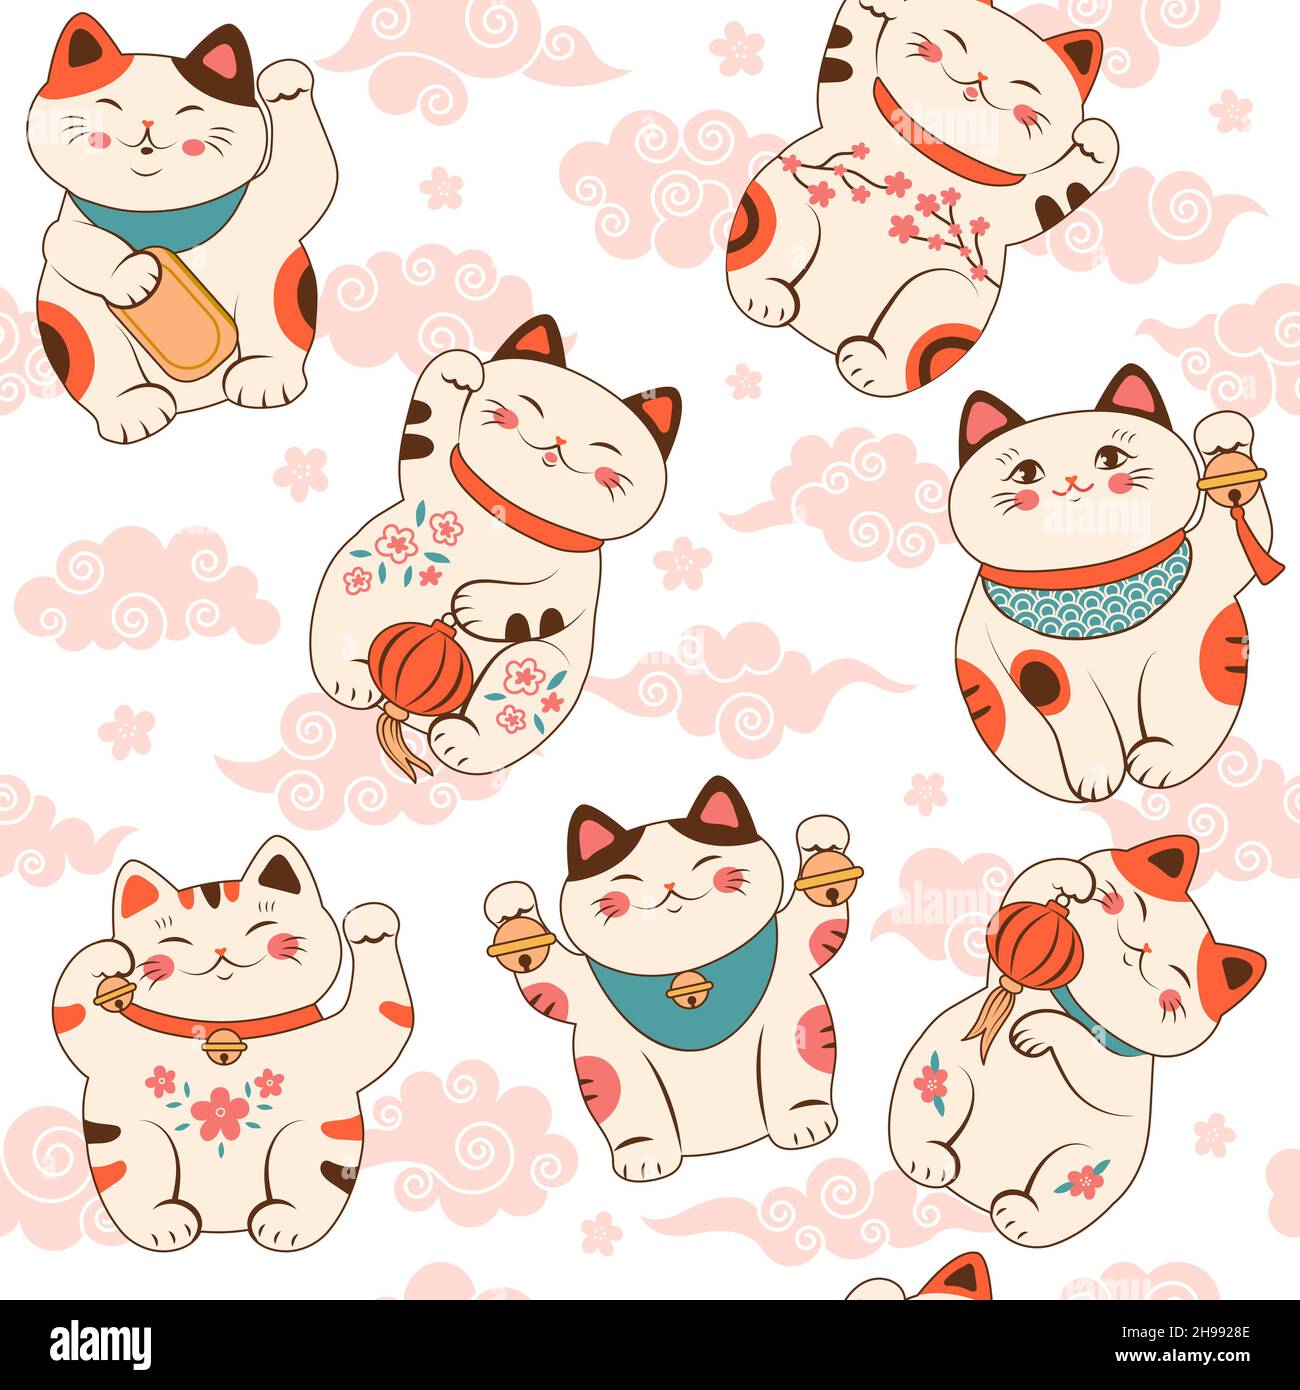 Asian cat pattern. Maneki neko character of fortune and lucky cheerful domestic animal recent vector seamless background Stock Vector